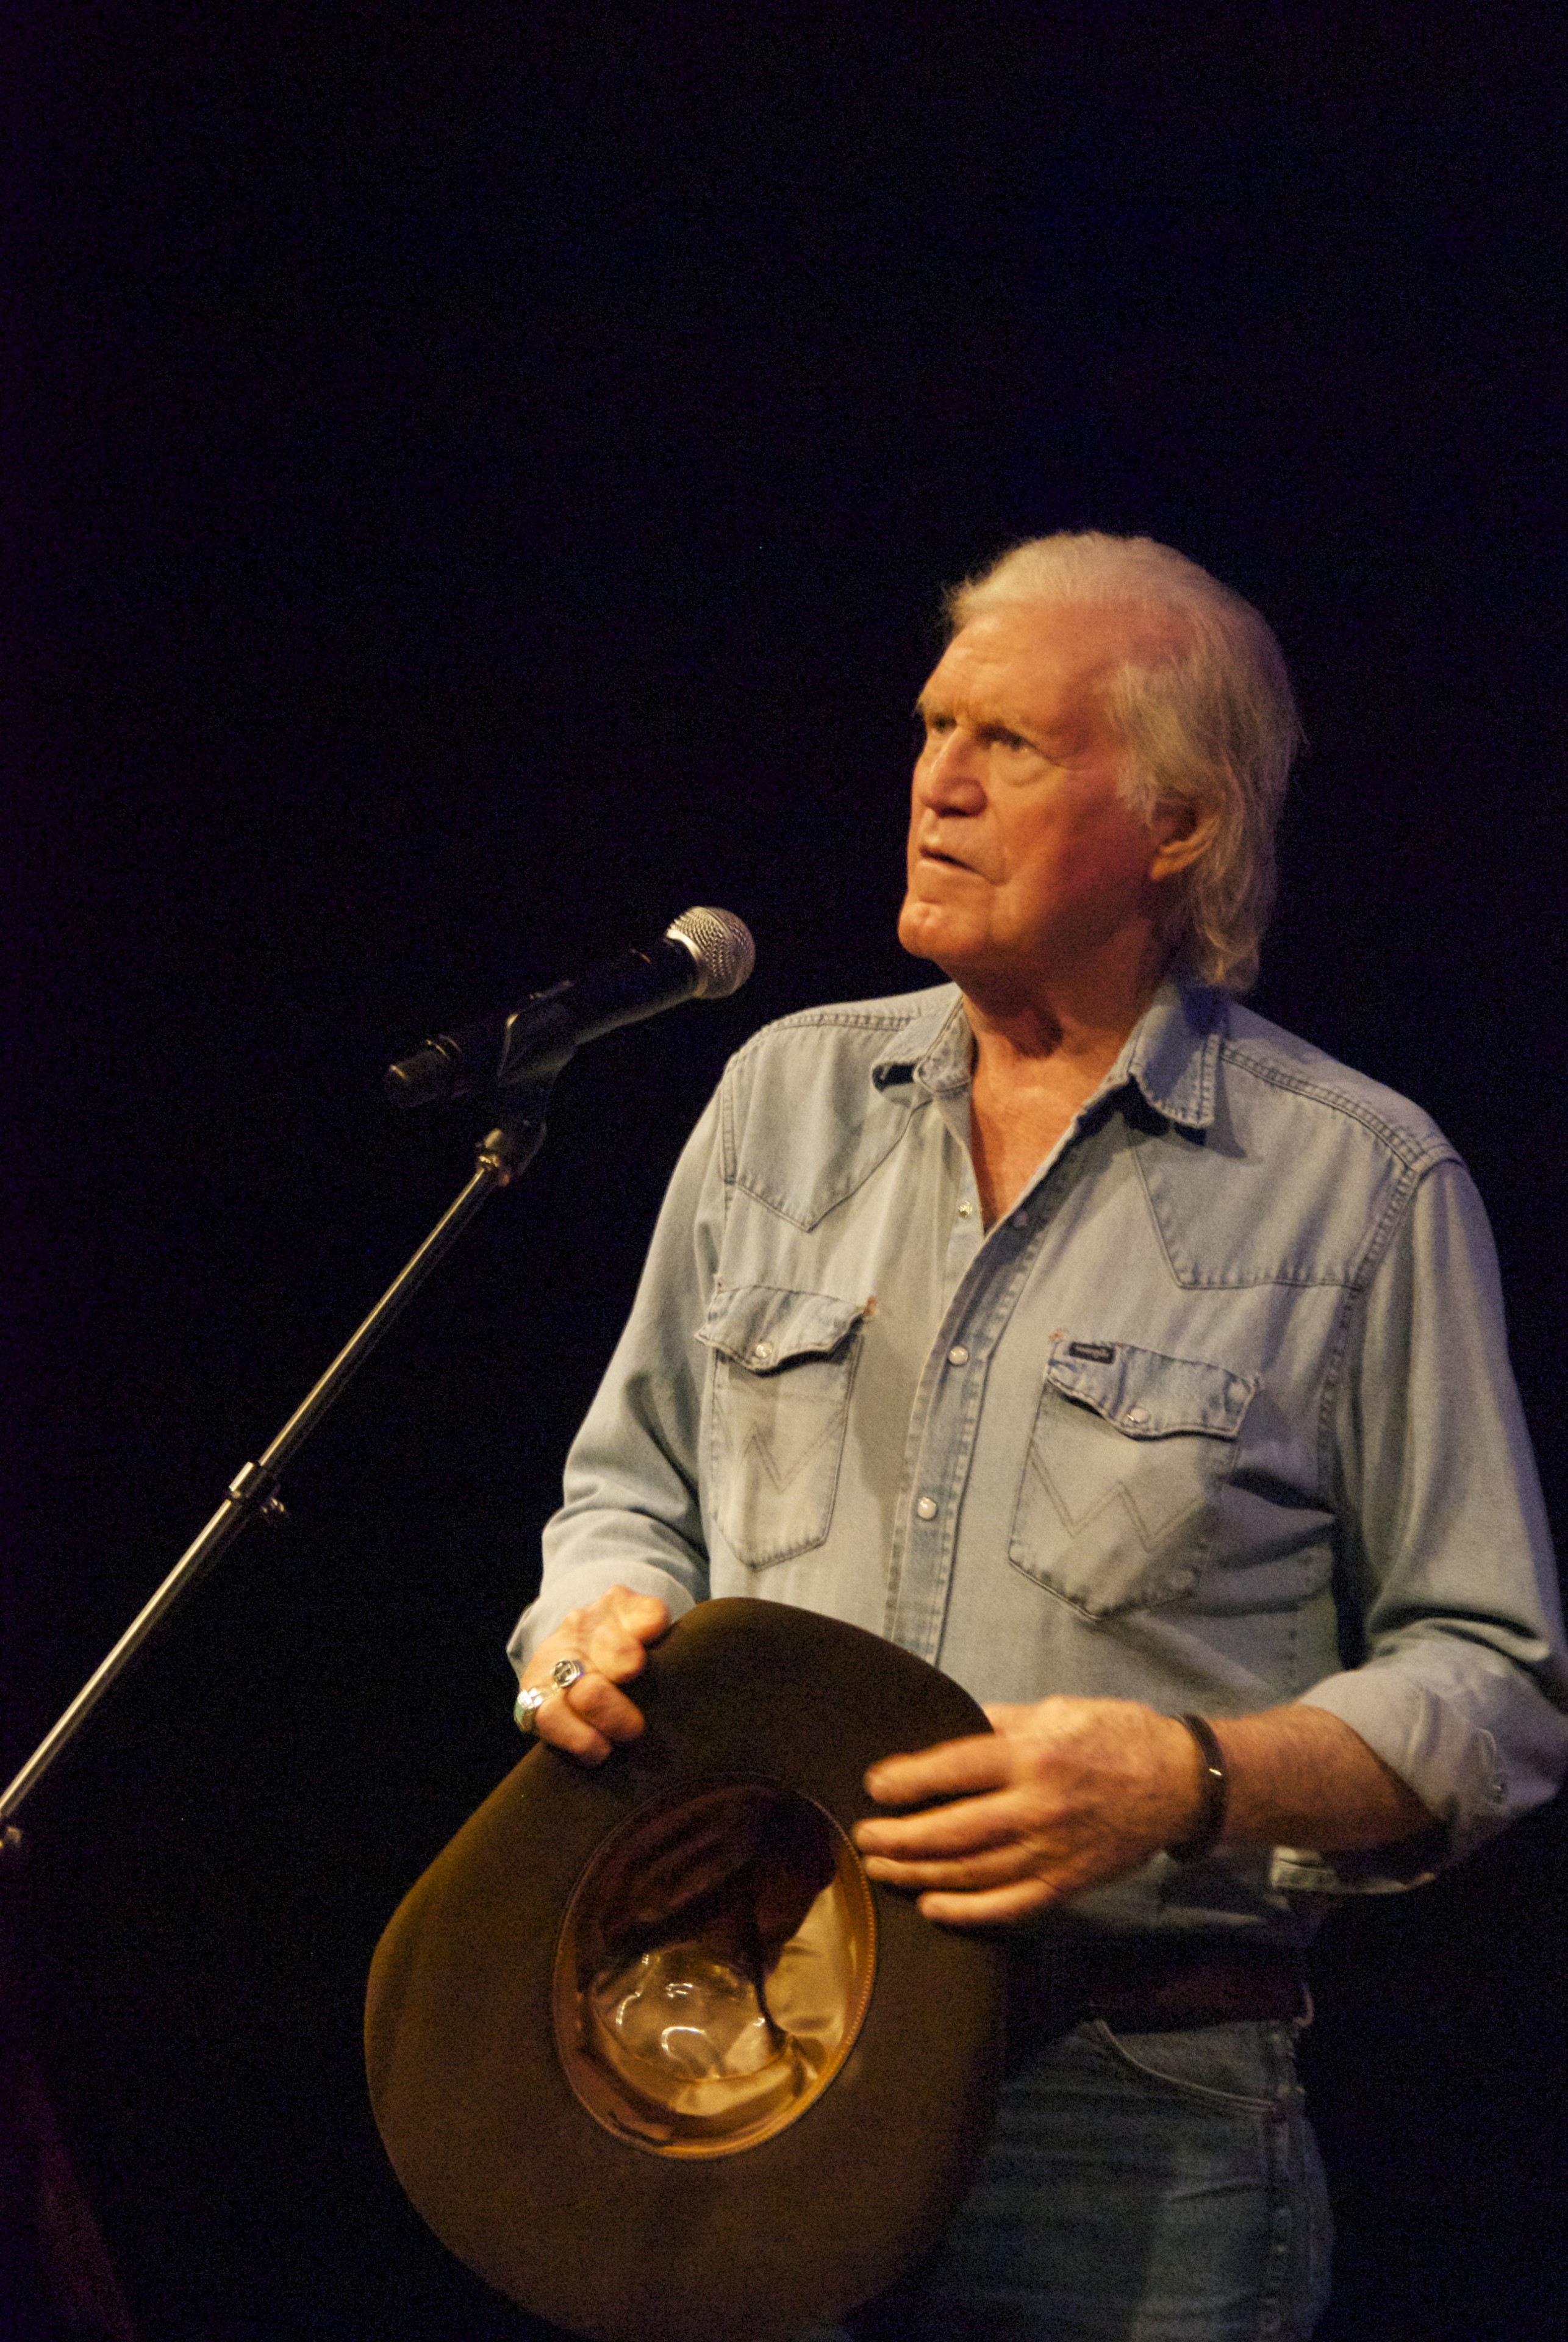 Outlaw country legend and honky-tonk hero Billy Joe Shaver dies at 81